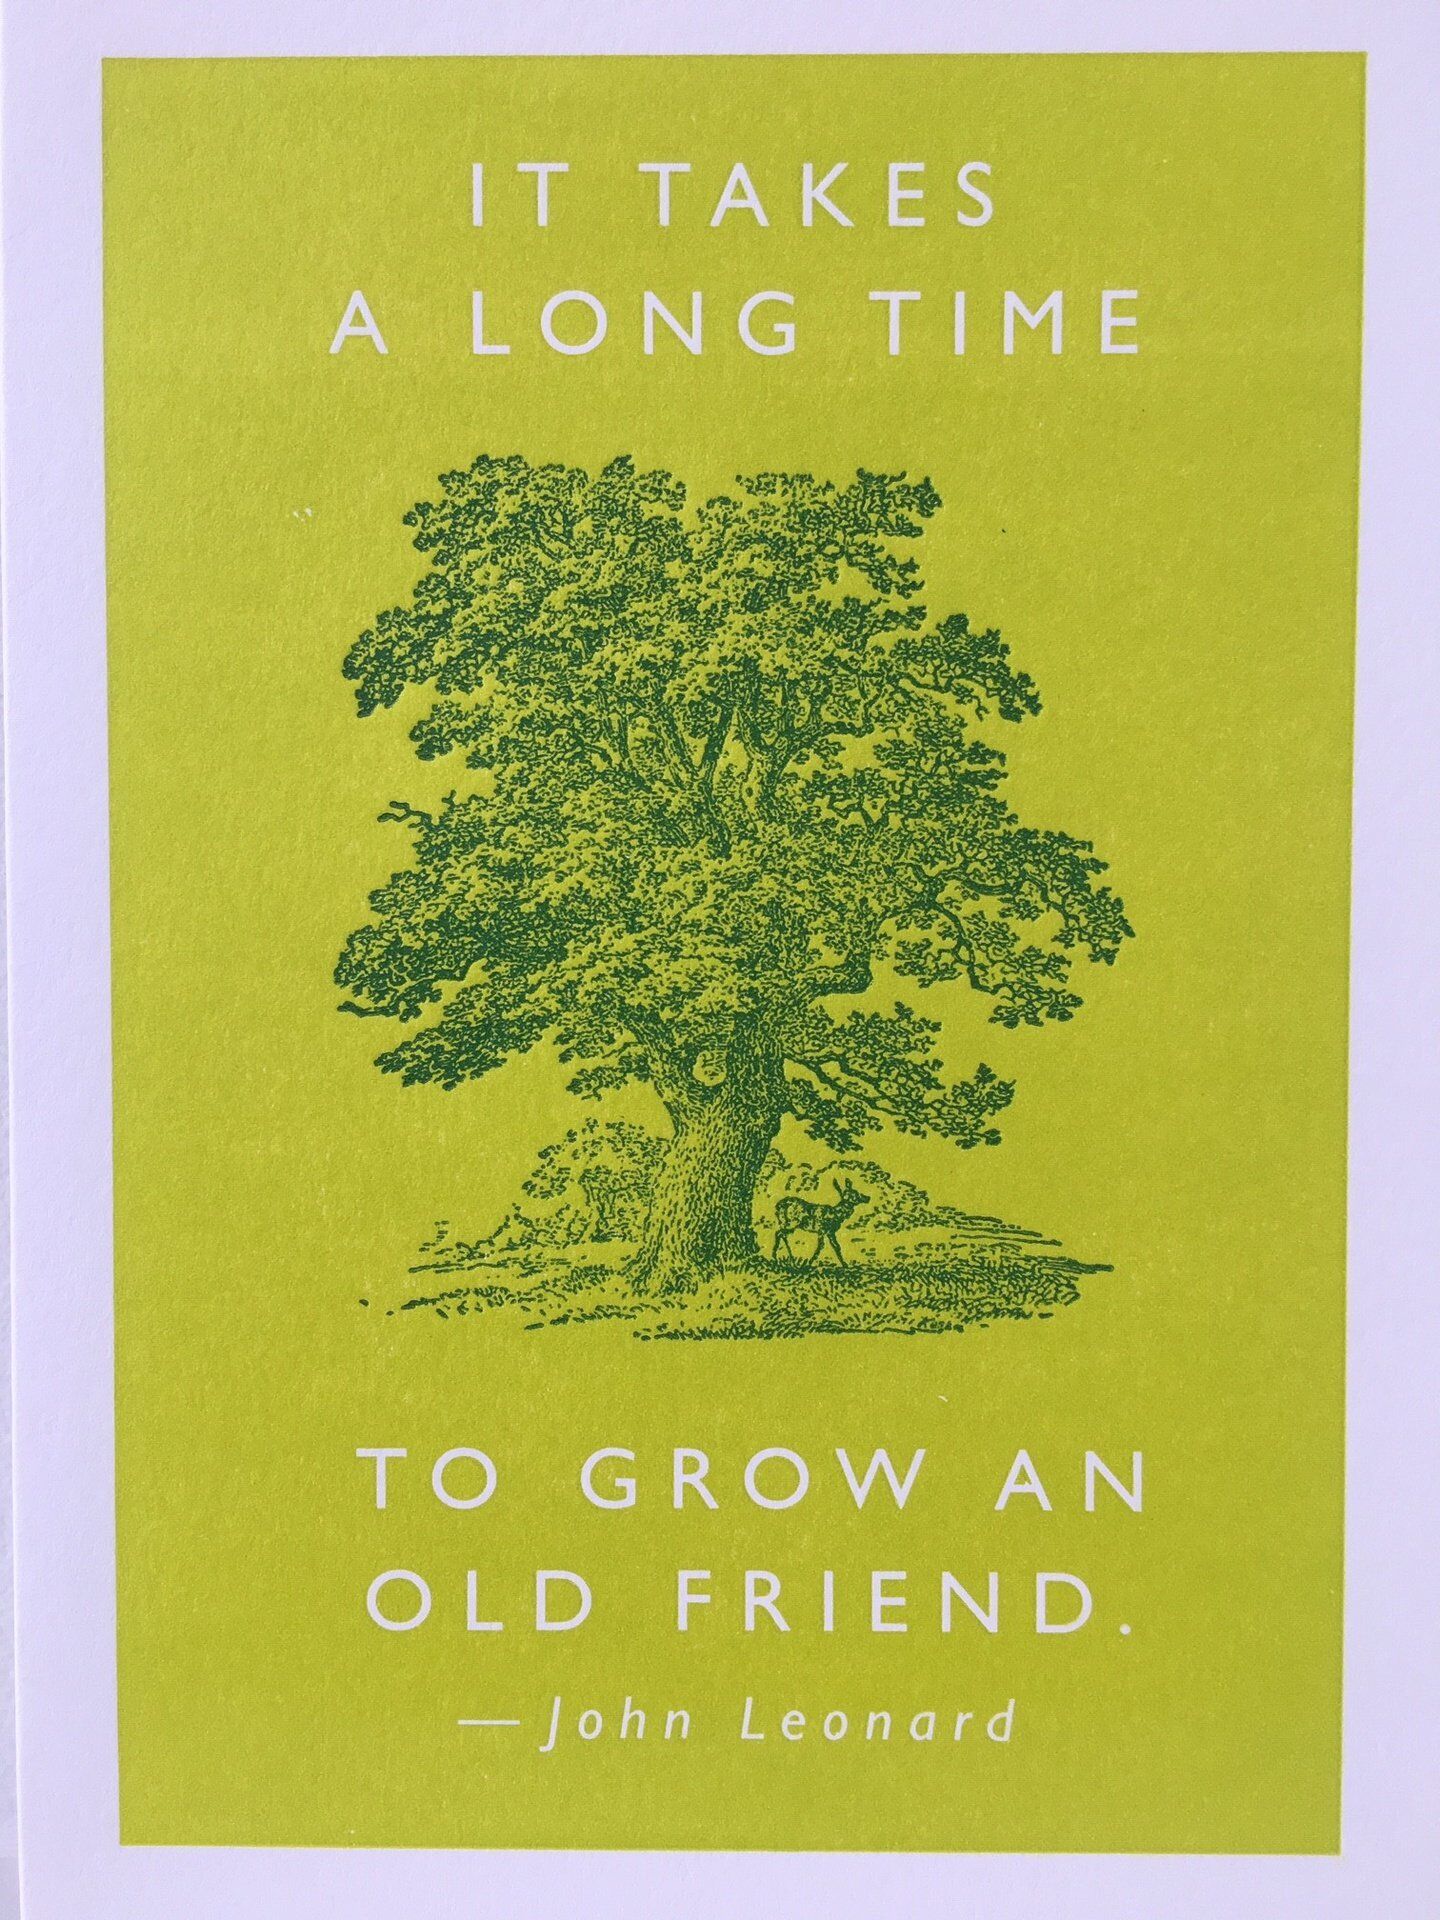 Card (Archivist Gallery): Old Friend